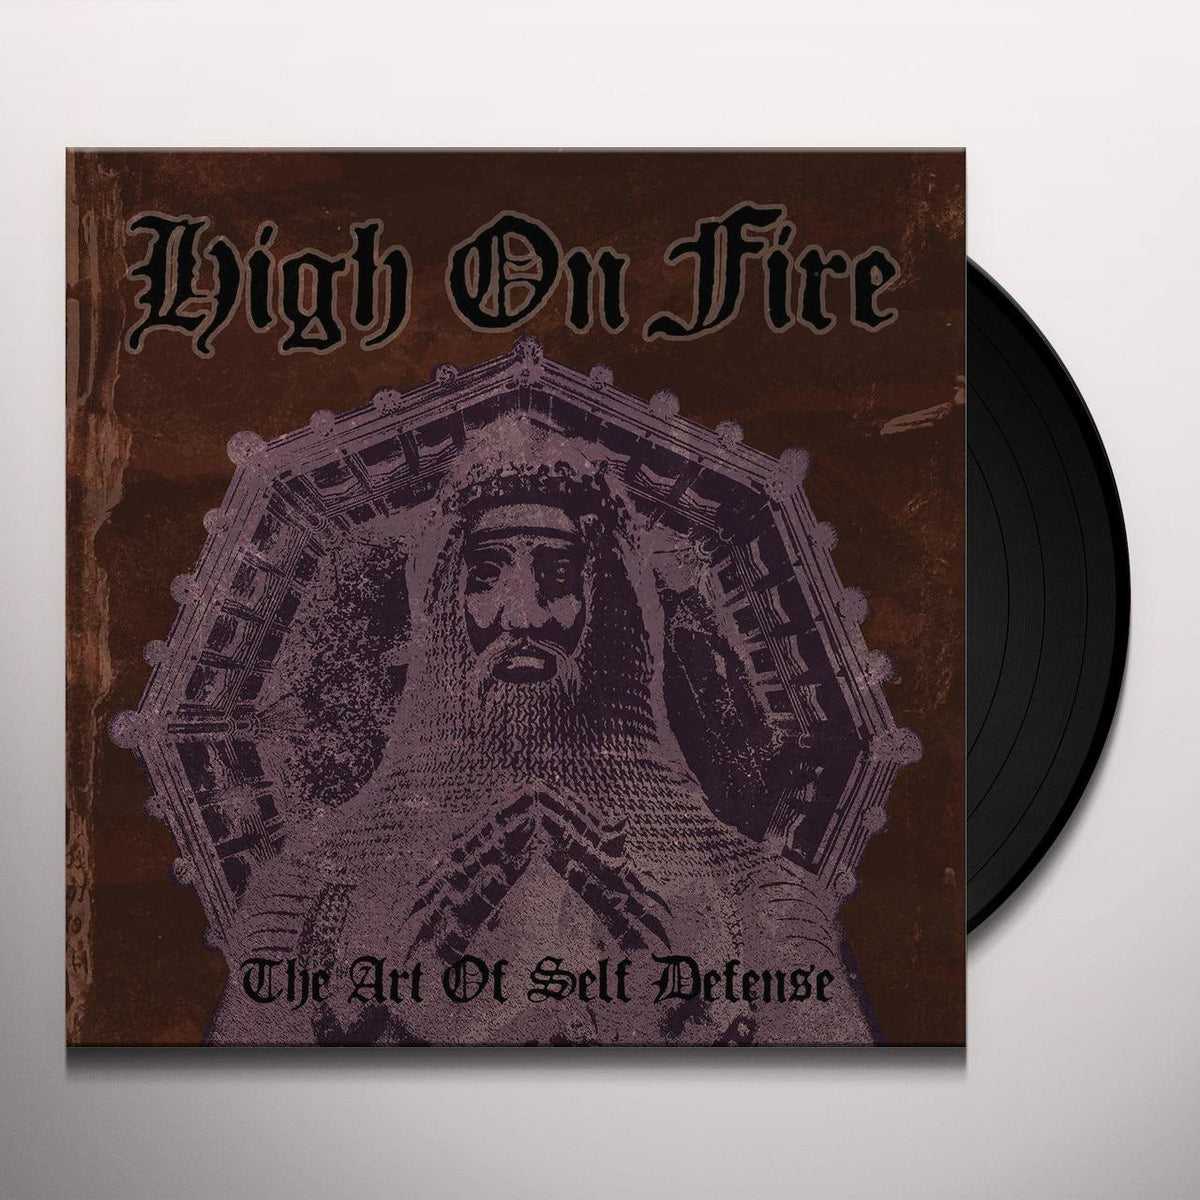 High On Fire - Art Of Self Defense LP (Limited Colored Vinyl)